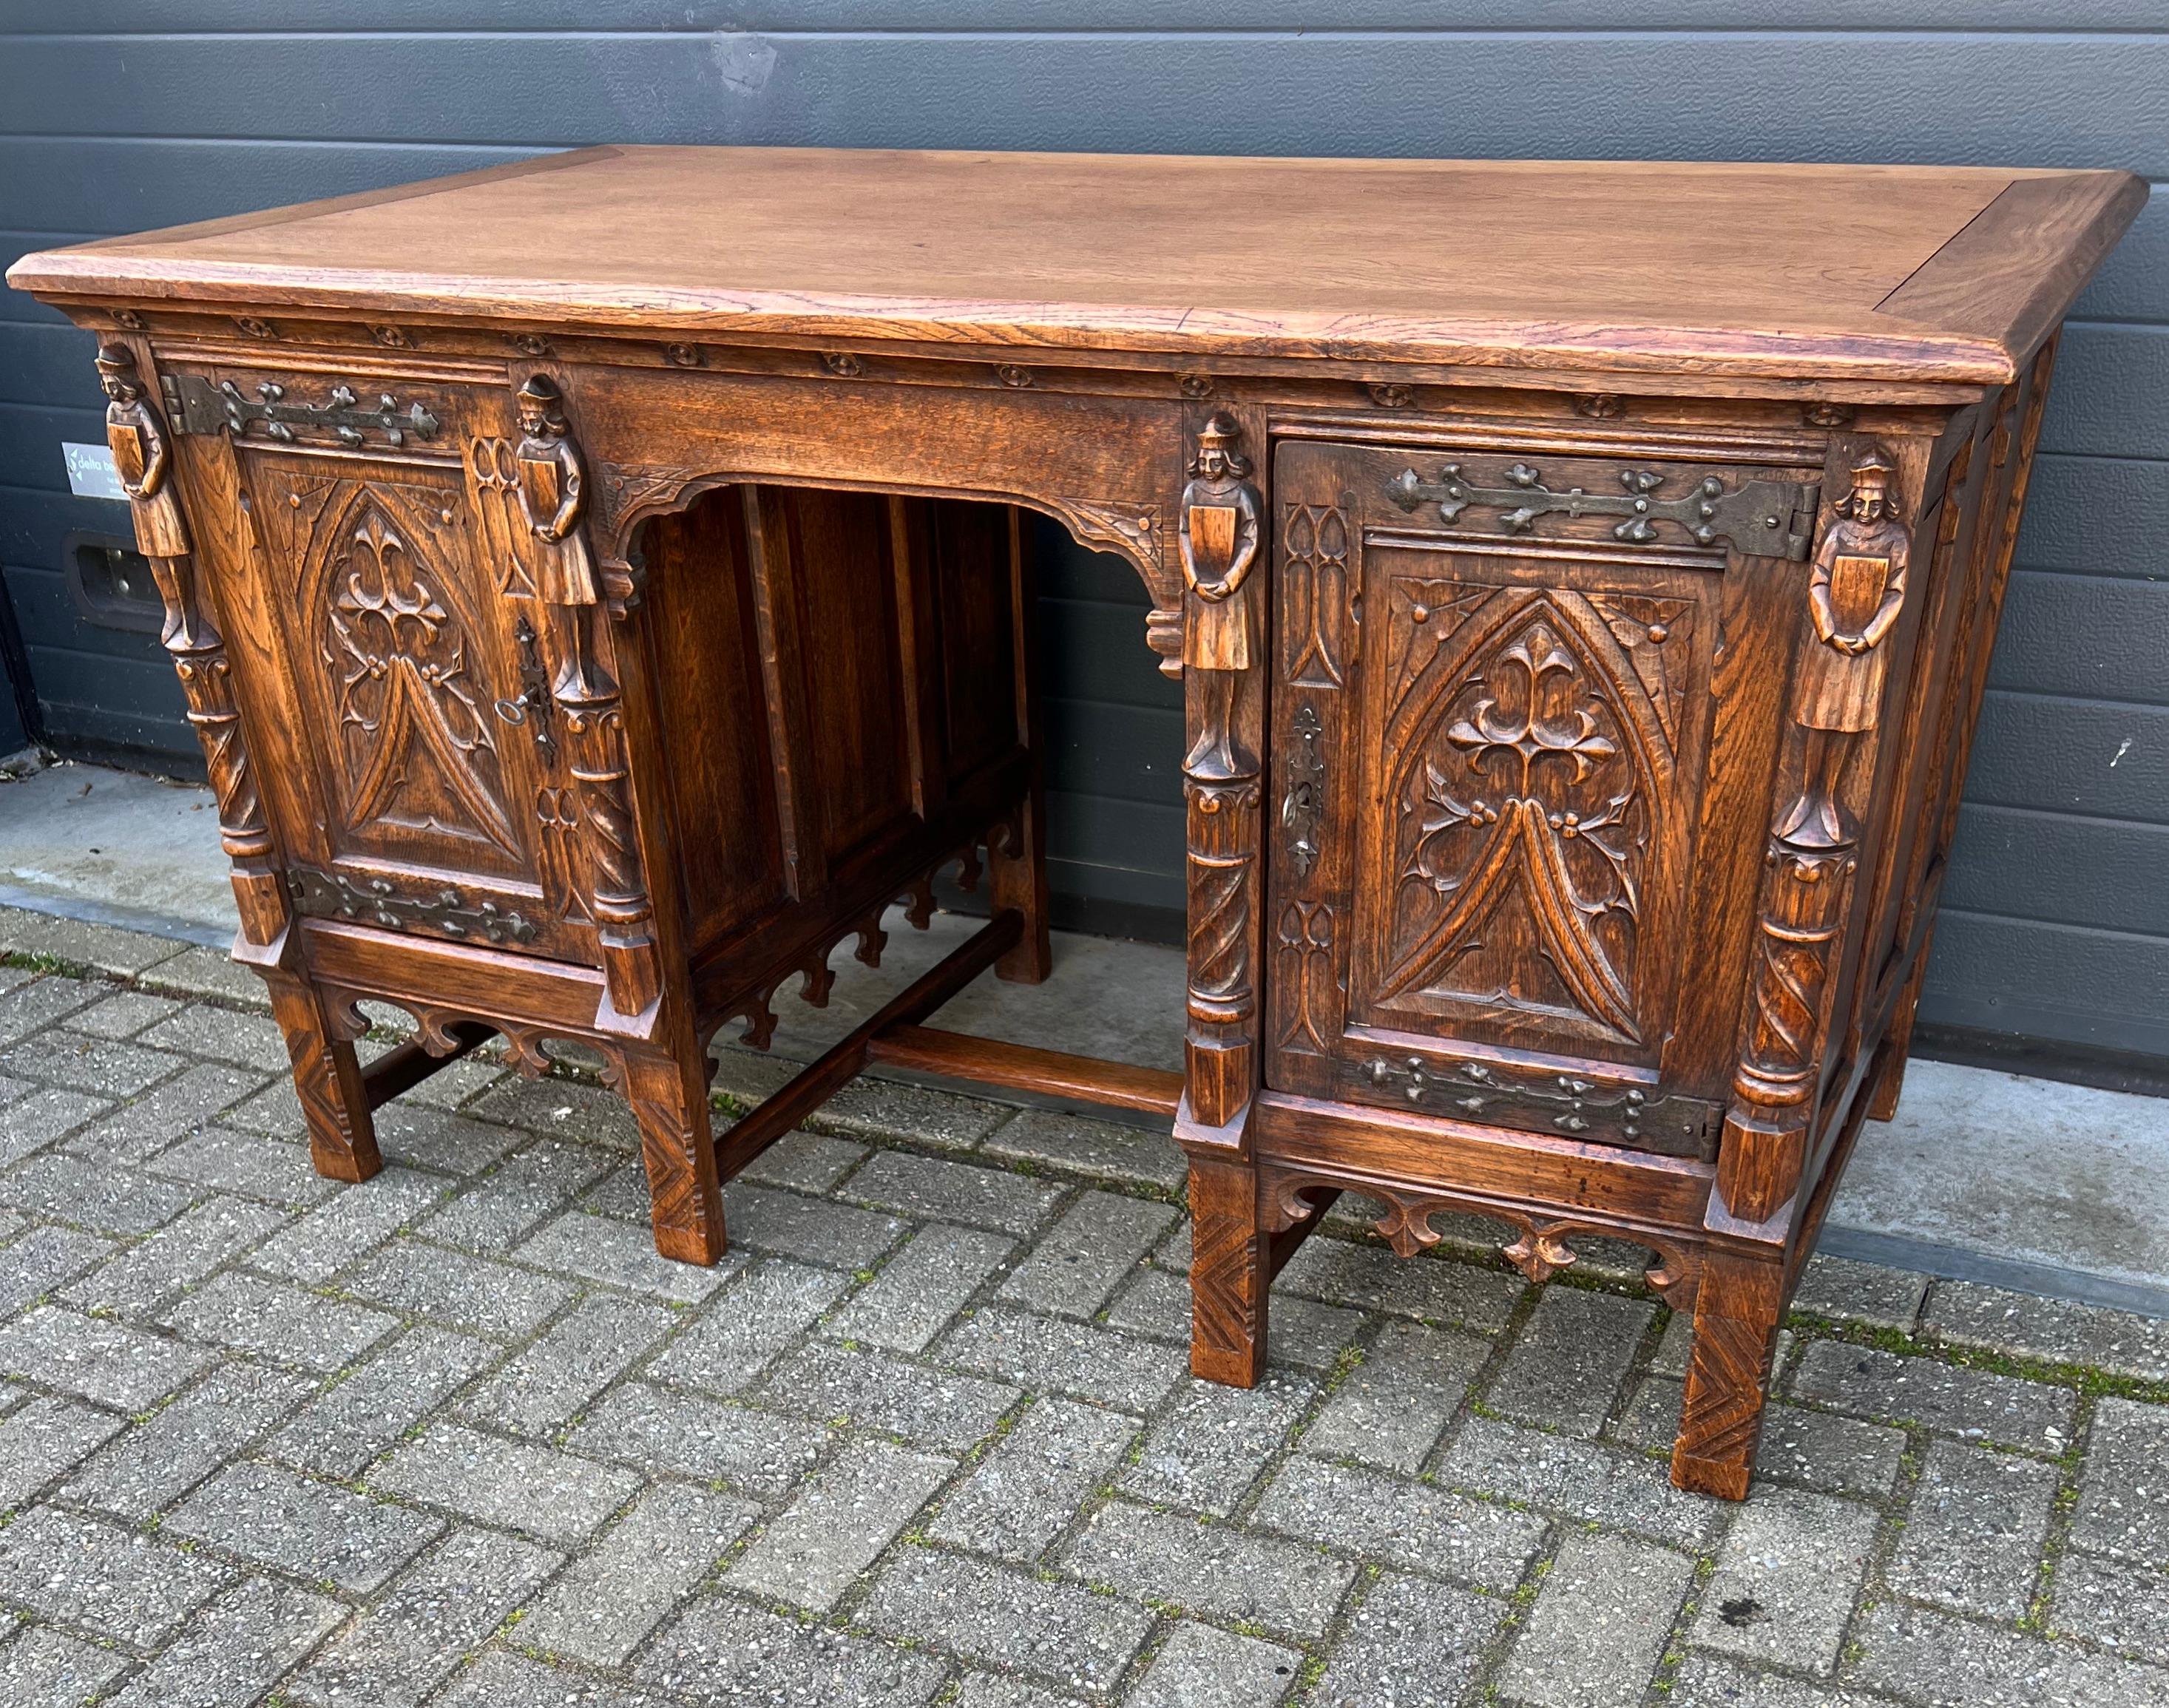 20th Century Outstanding Gothic Revival Desk w. Quality Carved Church Window Panels & Guards